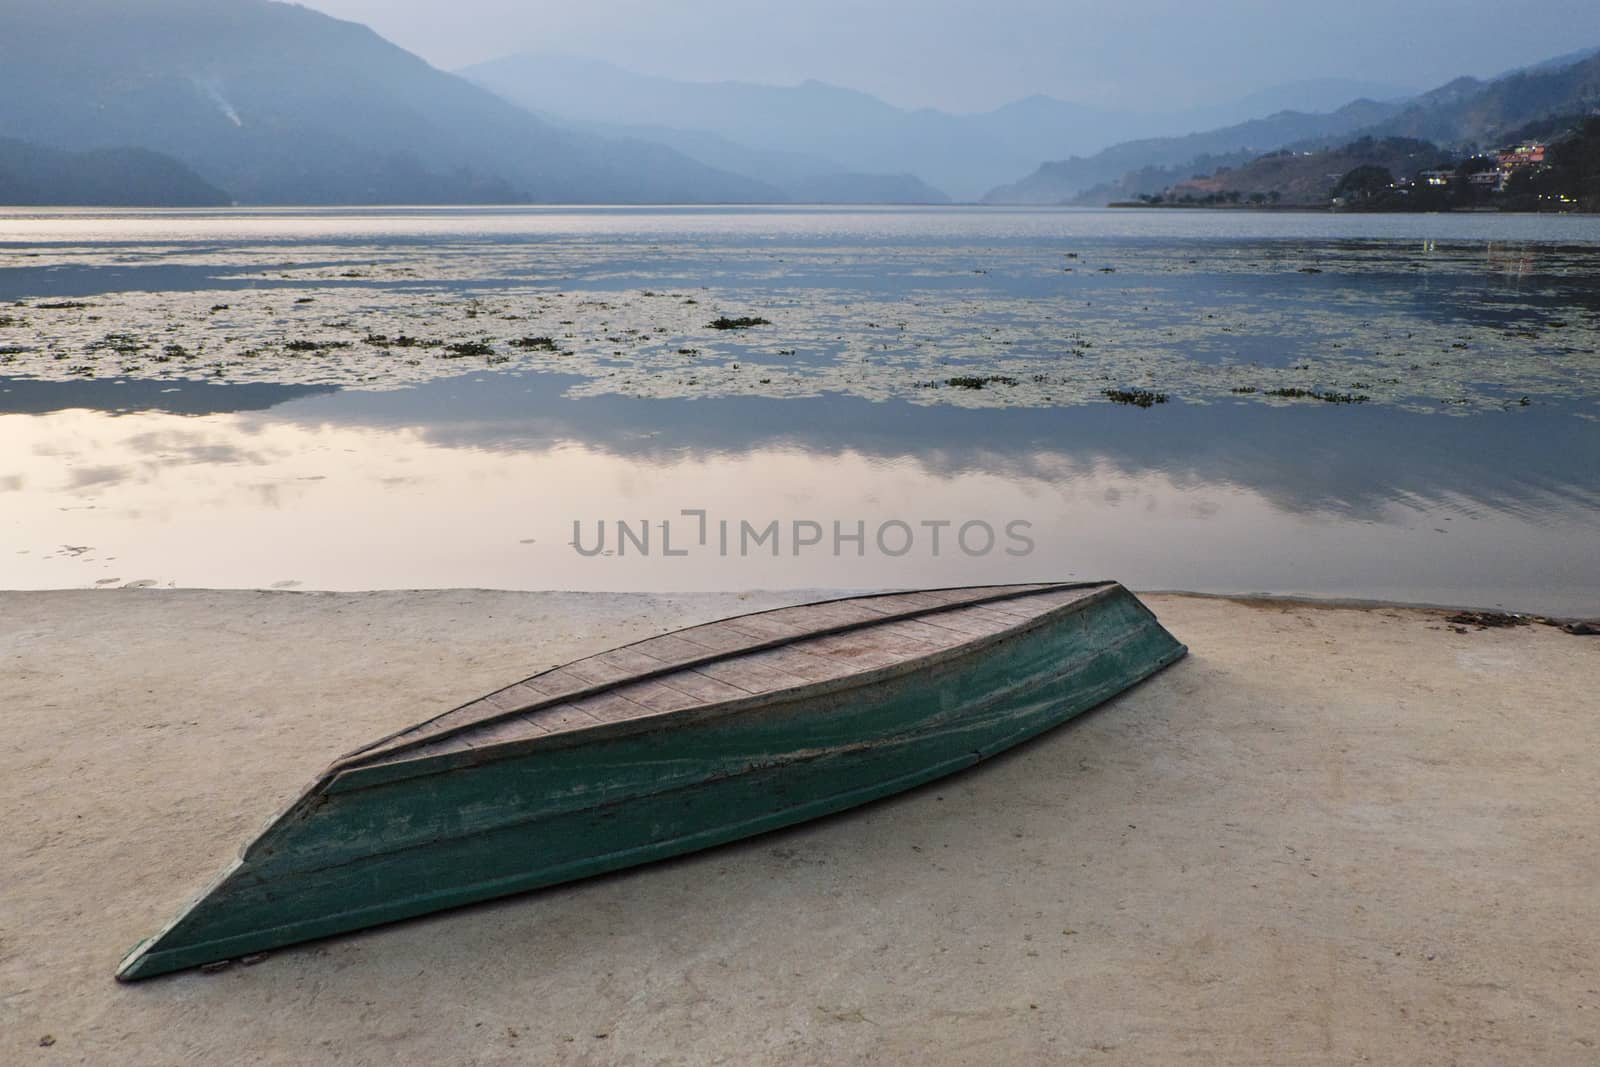 An inverted boat on a concrete embankment on the shore of a mountain lake at sunset.
